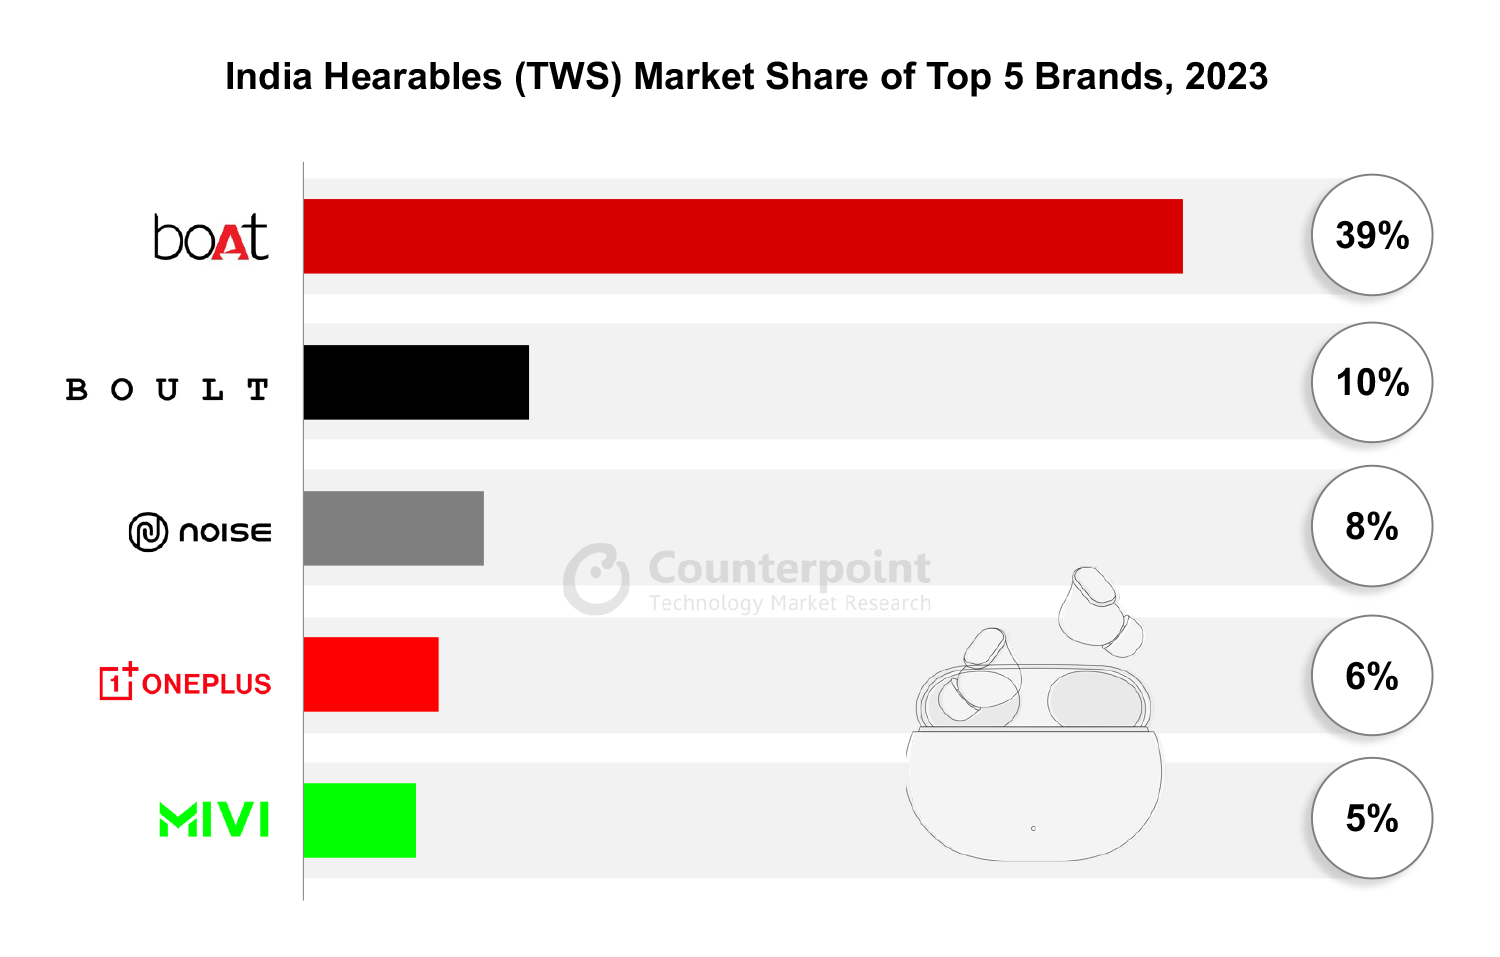 India Hearables (TWS) Market Share of Top 5 Brands, 2023